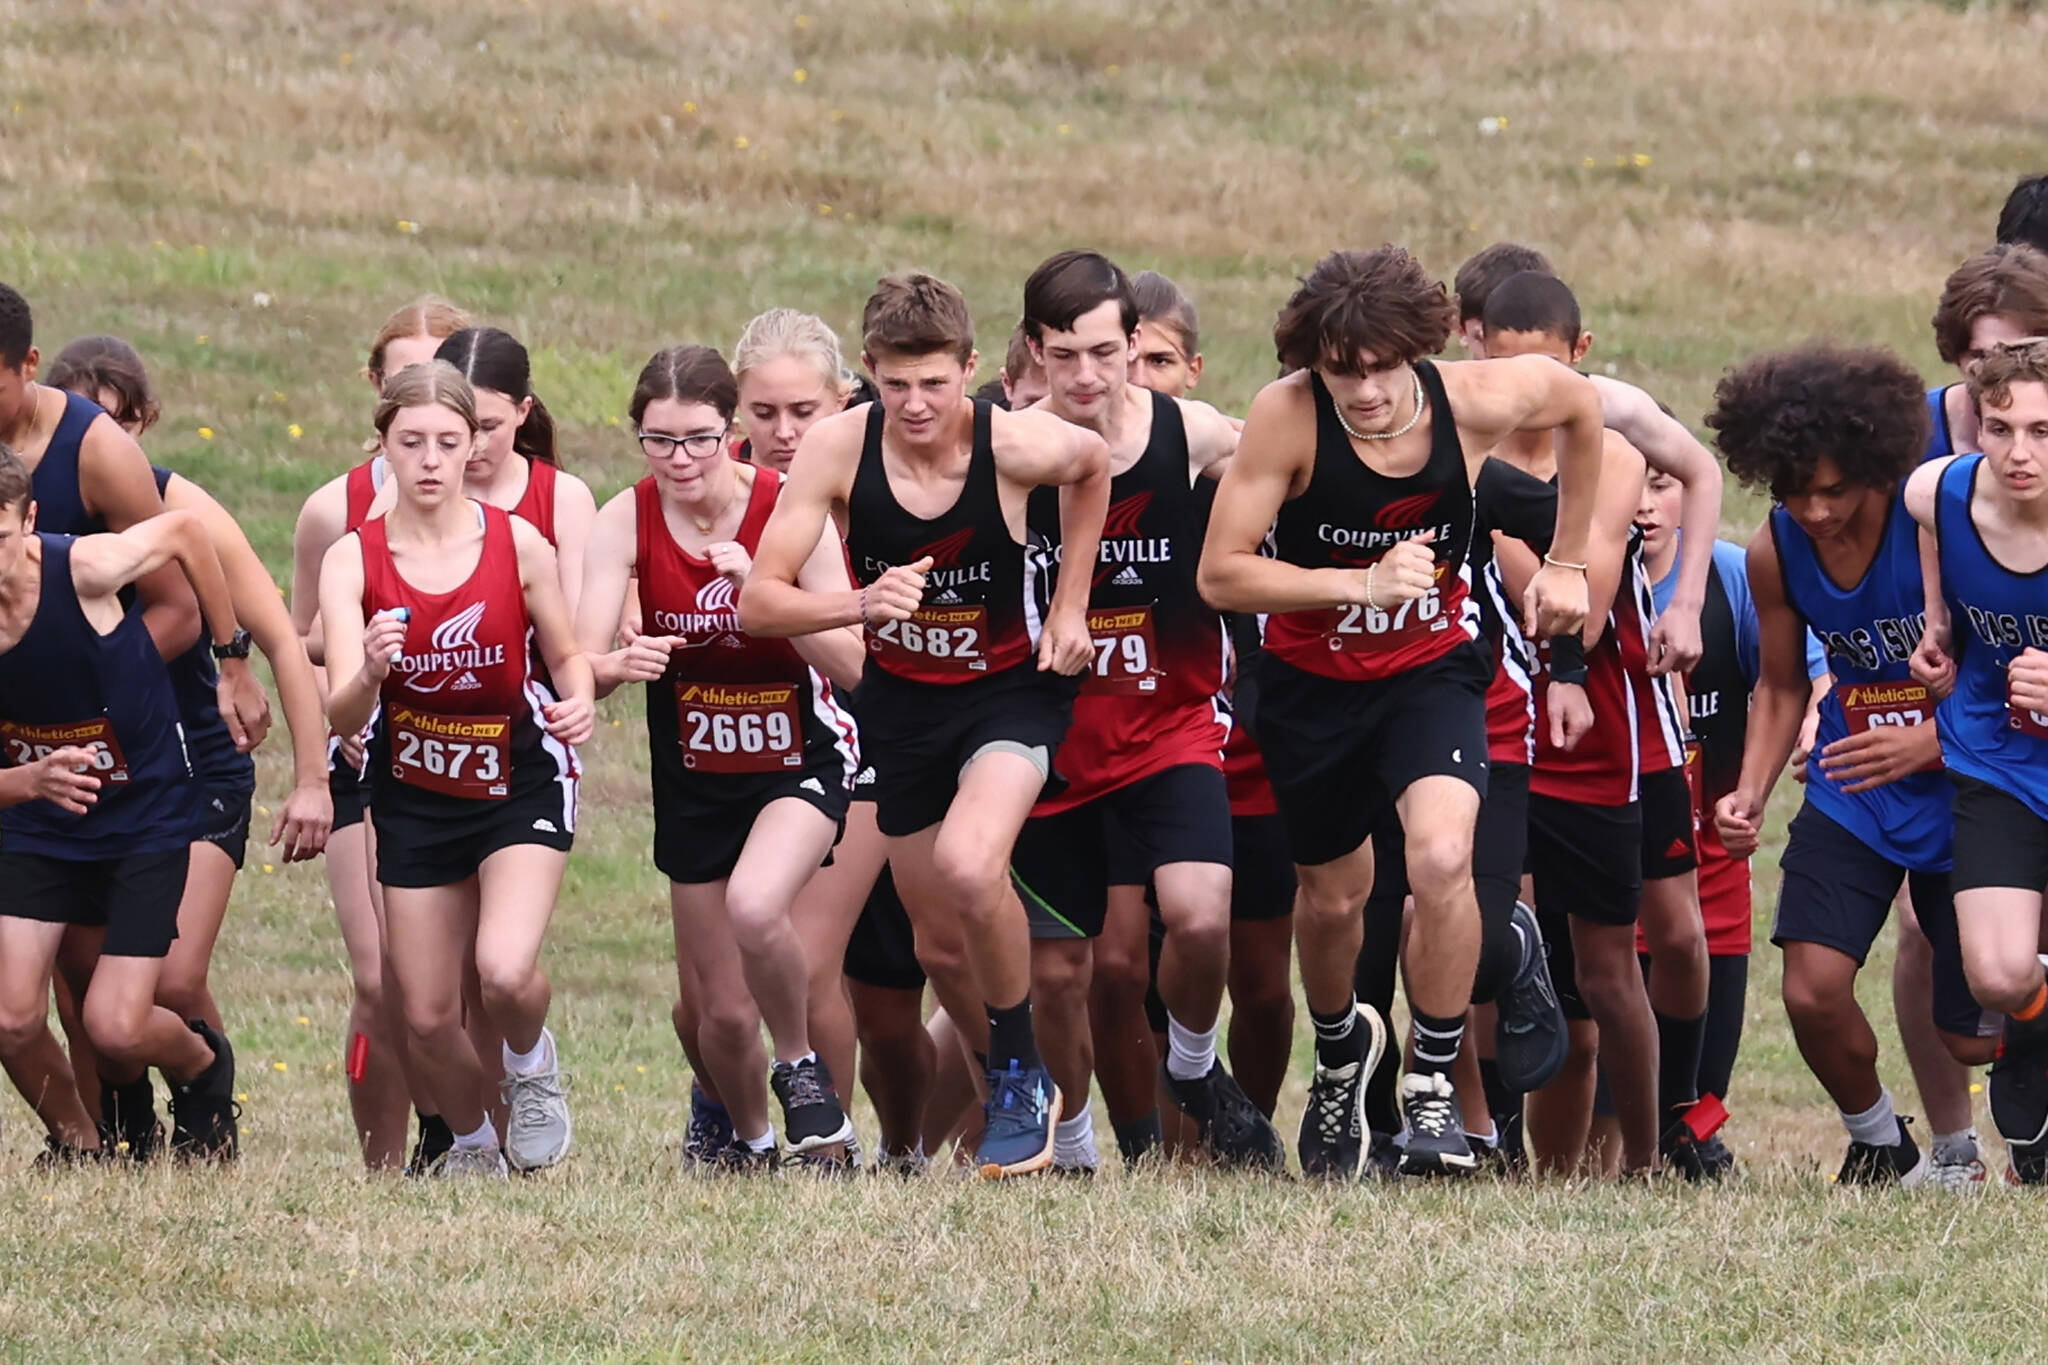 Cross country girls and boys start racing together during a race at Fort Casey State Park Wednesday. (Photo by John Fisken)